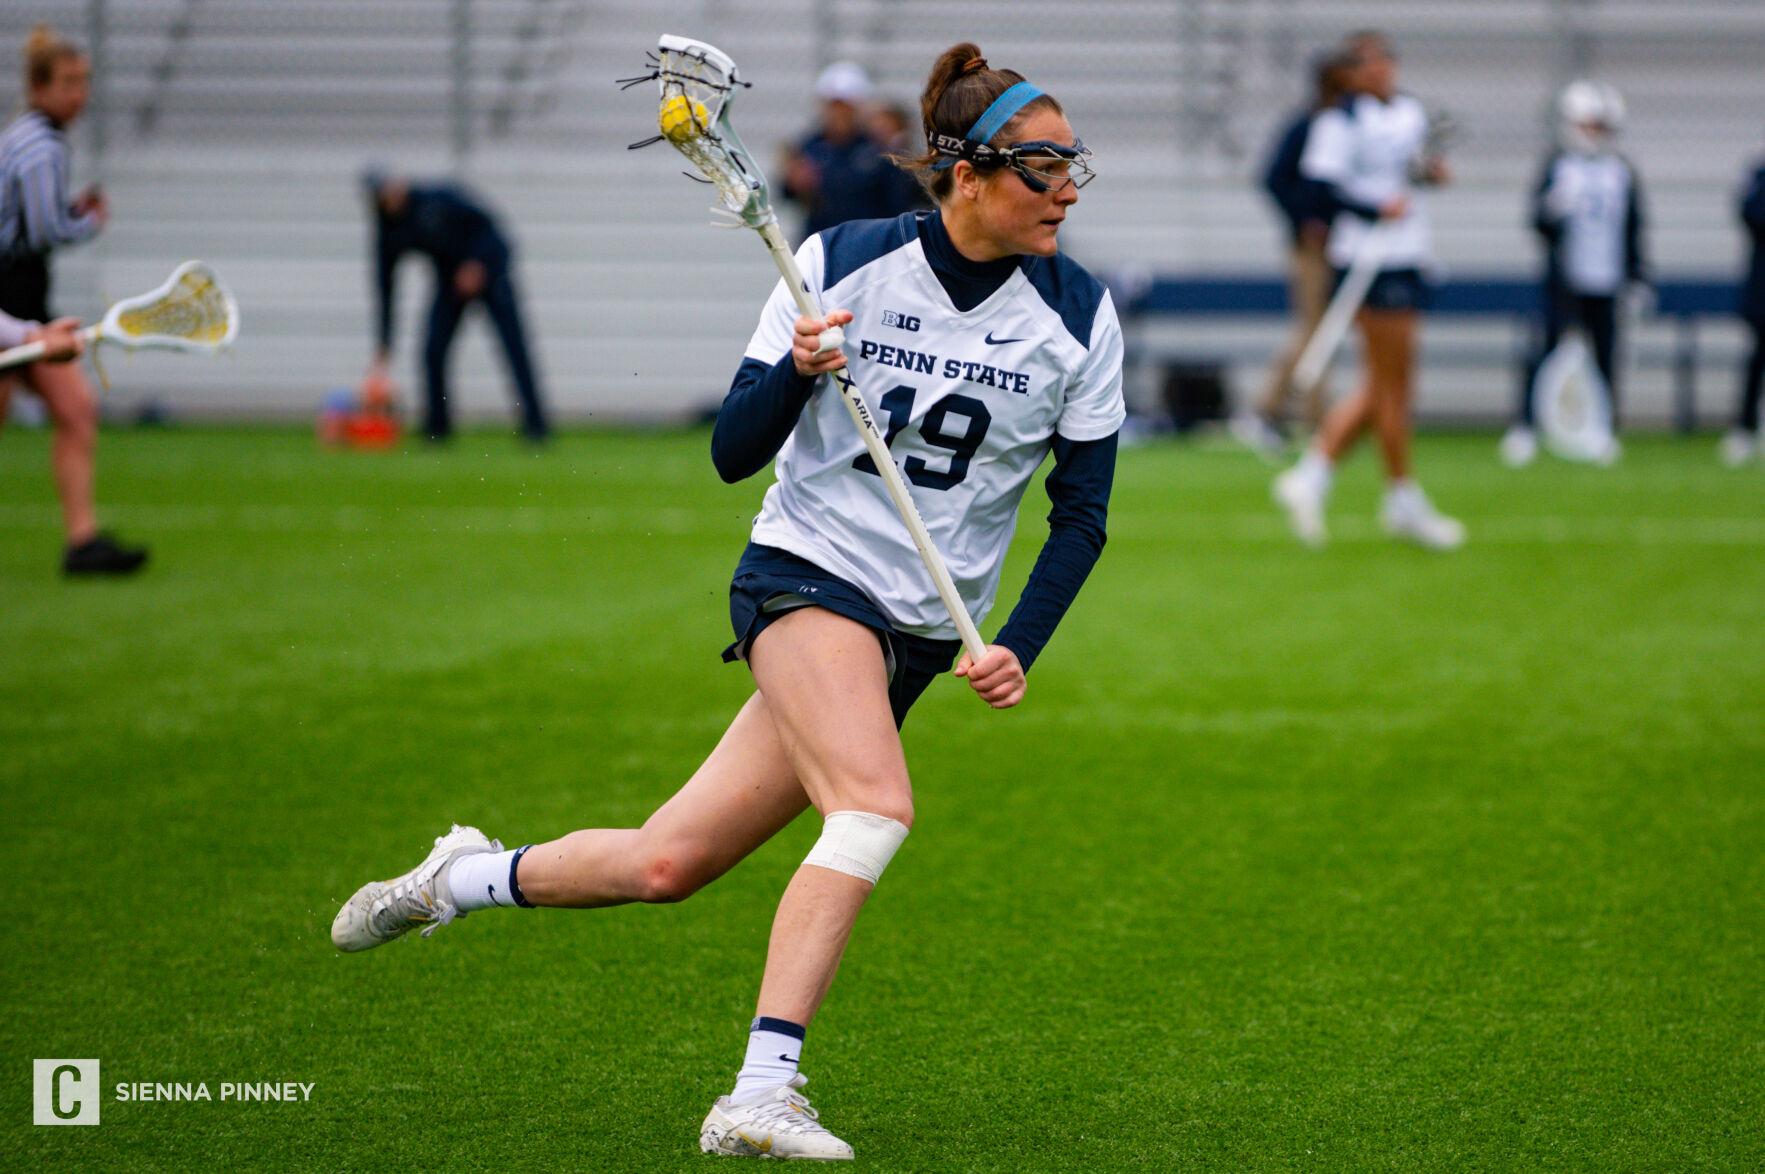 Several members of Penn State women's lacrosse named to West/Midwest All-Region team